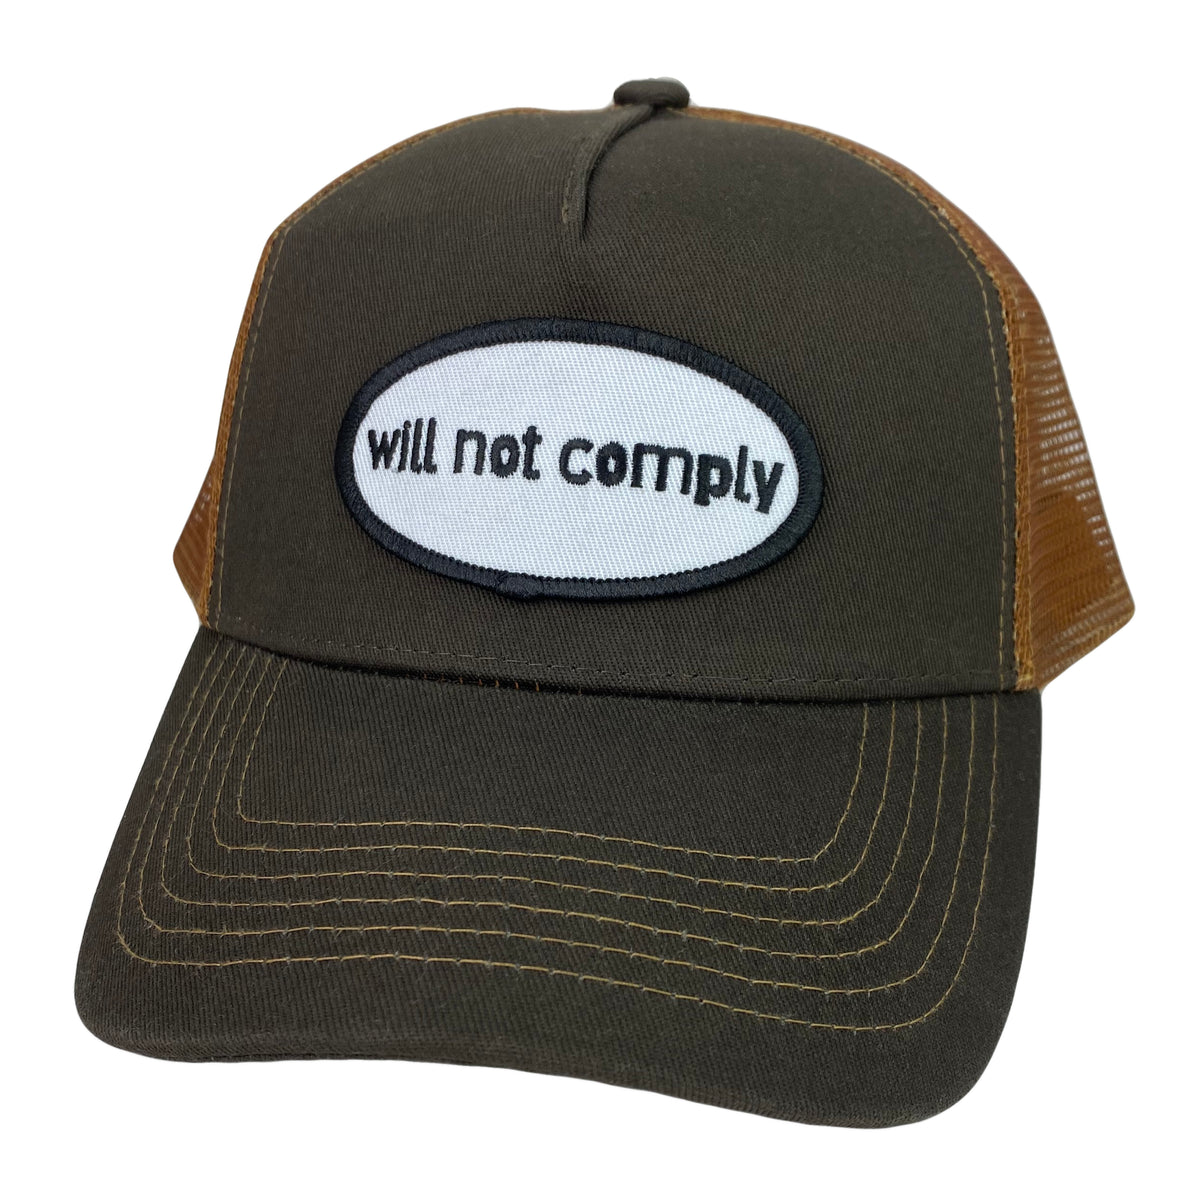 will not comply ~ brown